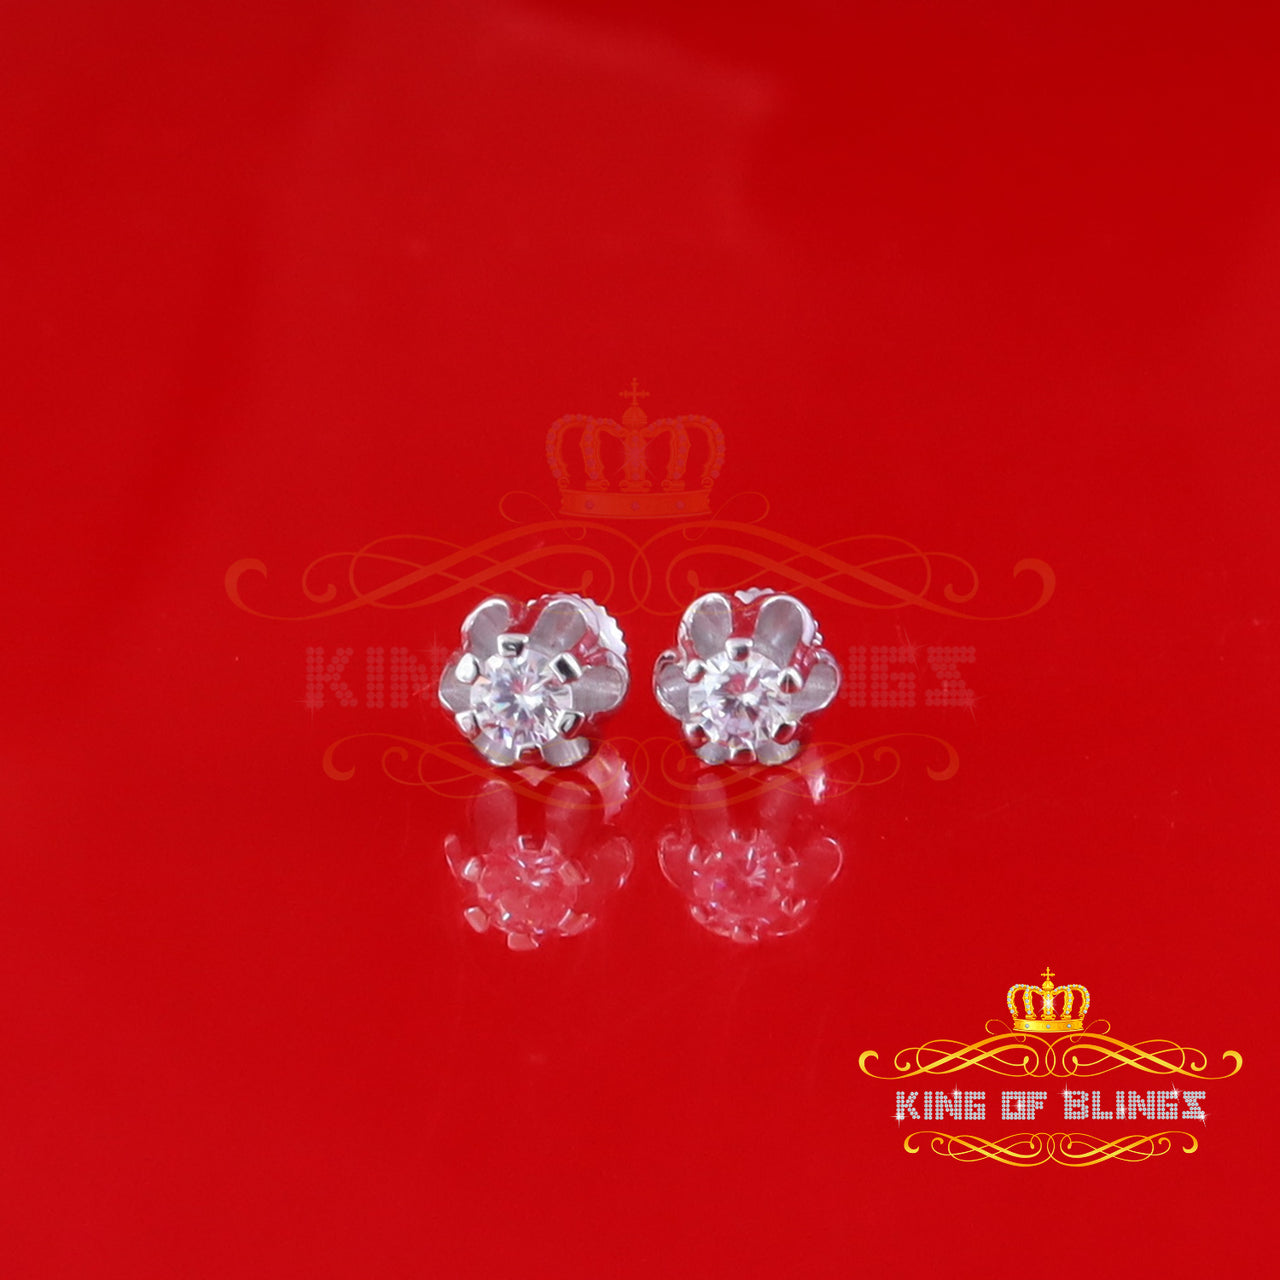 King of Bling's 0.25ct 925 Silver Cubic Zirconia White Round Shape Buttercup Stud Earrings Women